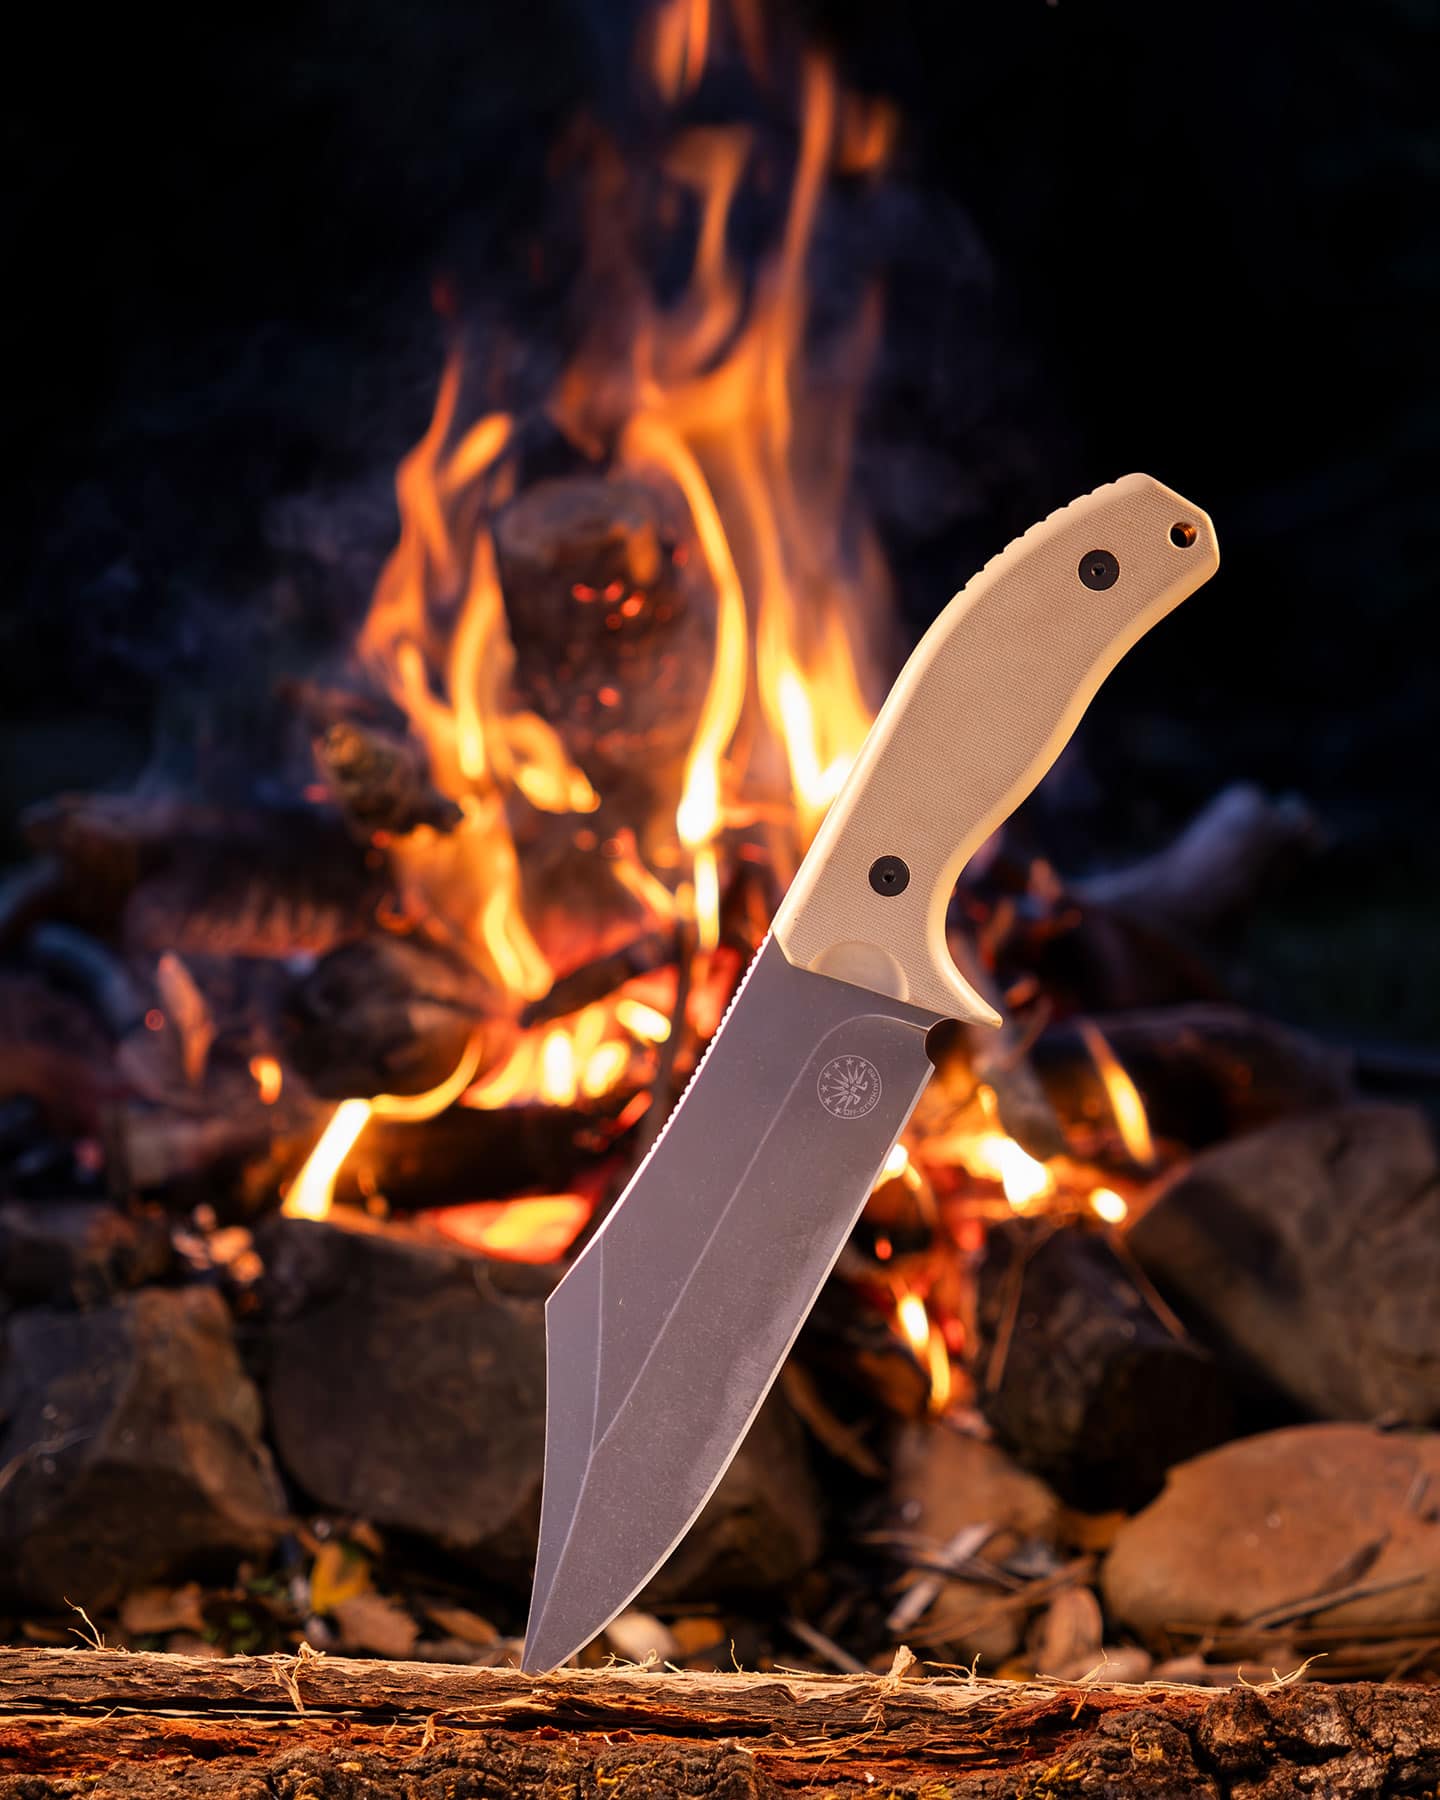 The best knife for feuding with the family from the next holler award goes to the Off-Grid XXL Caiman Bowie.